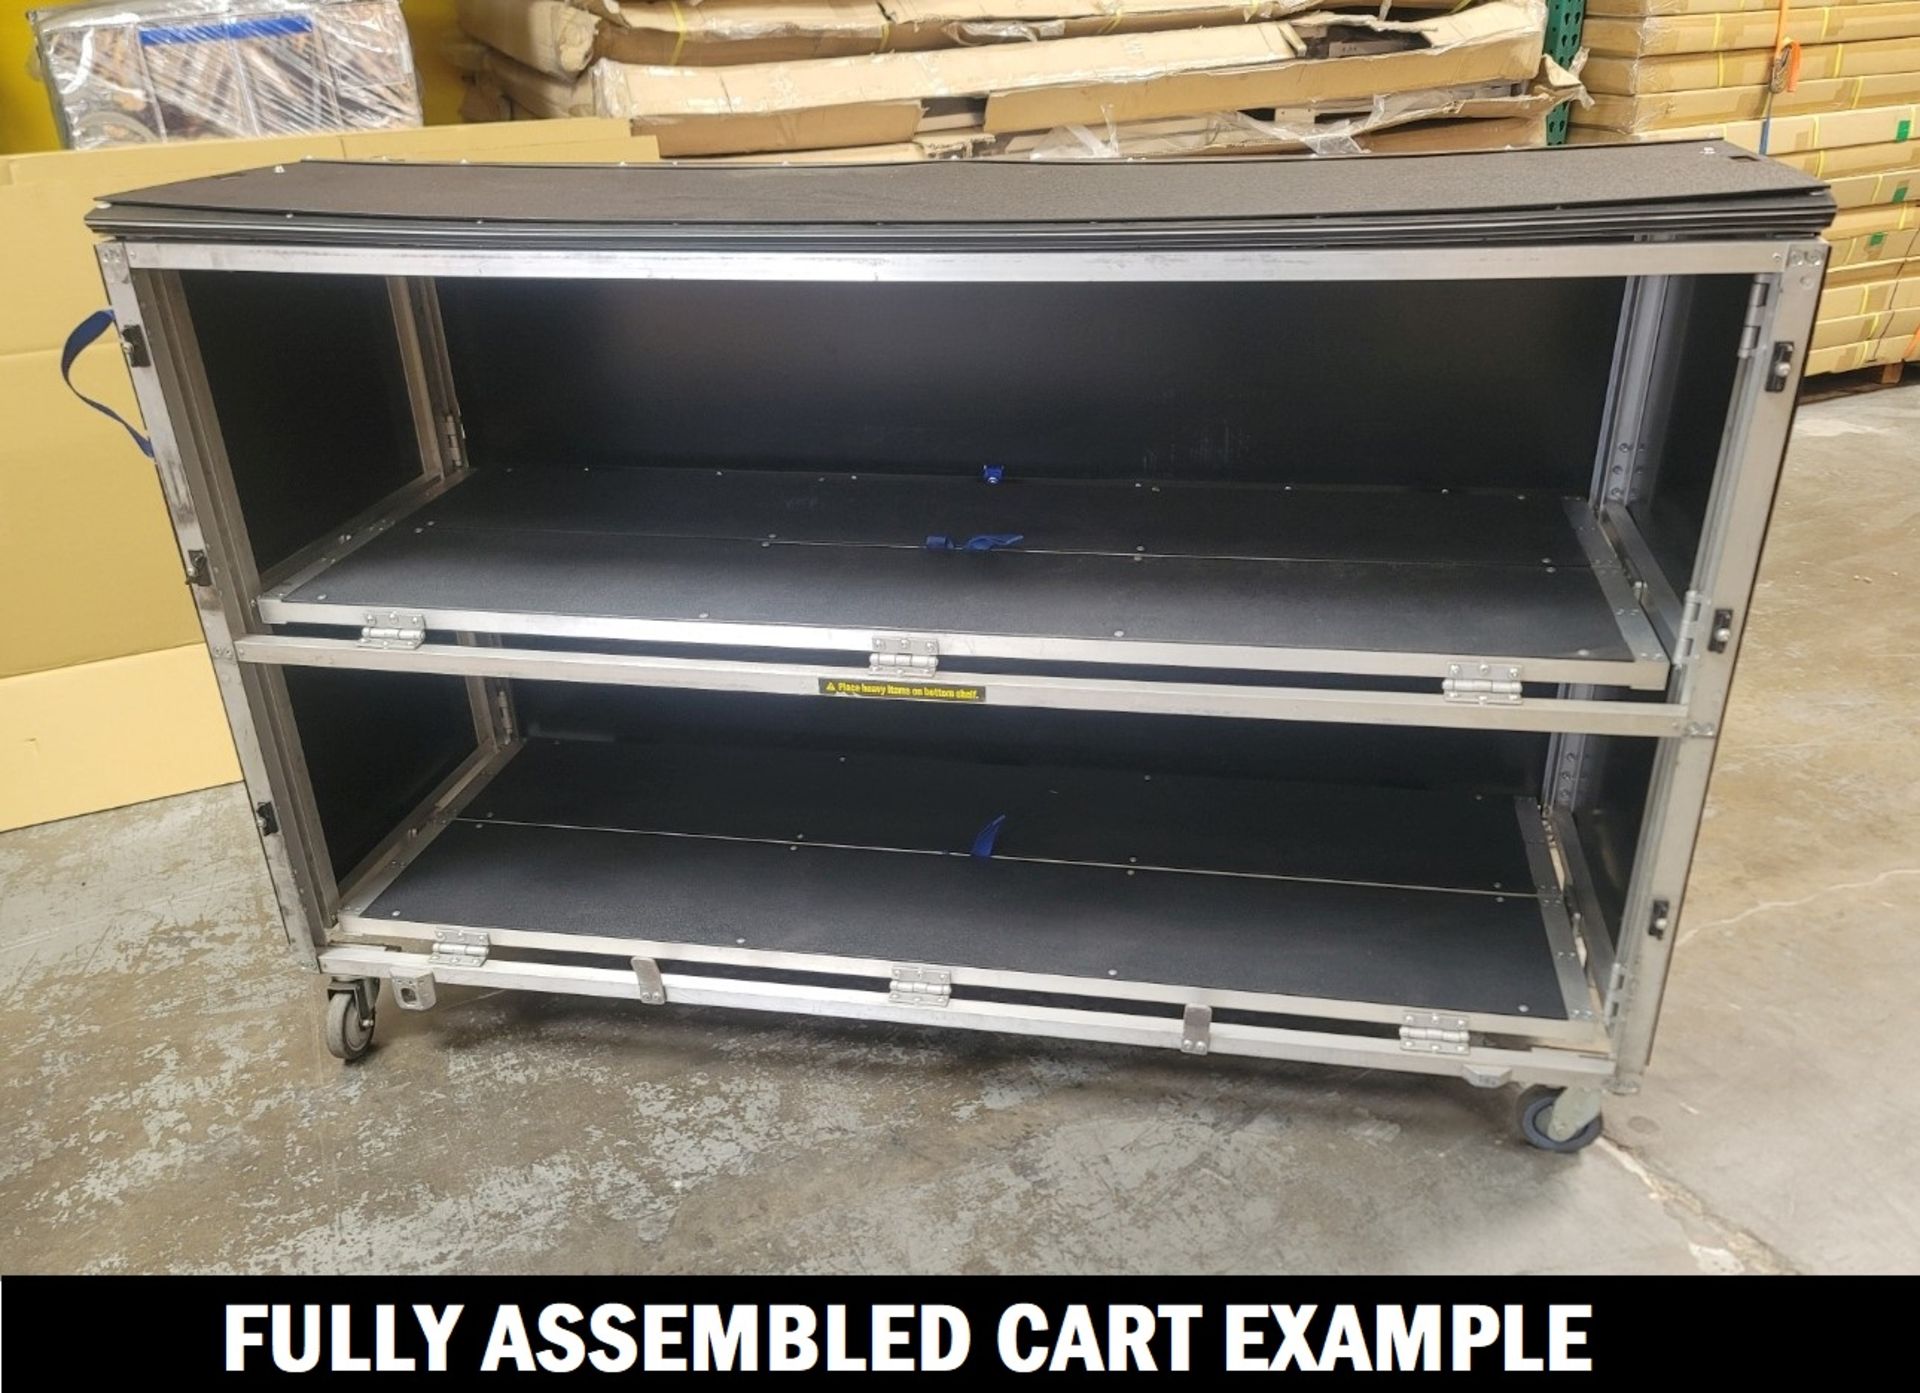 LOT - (2) TWO SHELF ROLLING CARTS, FOLDABLE, SWIVEL WHEEL ON ONE SIDE WITH BRAKE, GULL WING DOORS, - Image 2 of 5